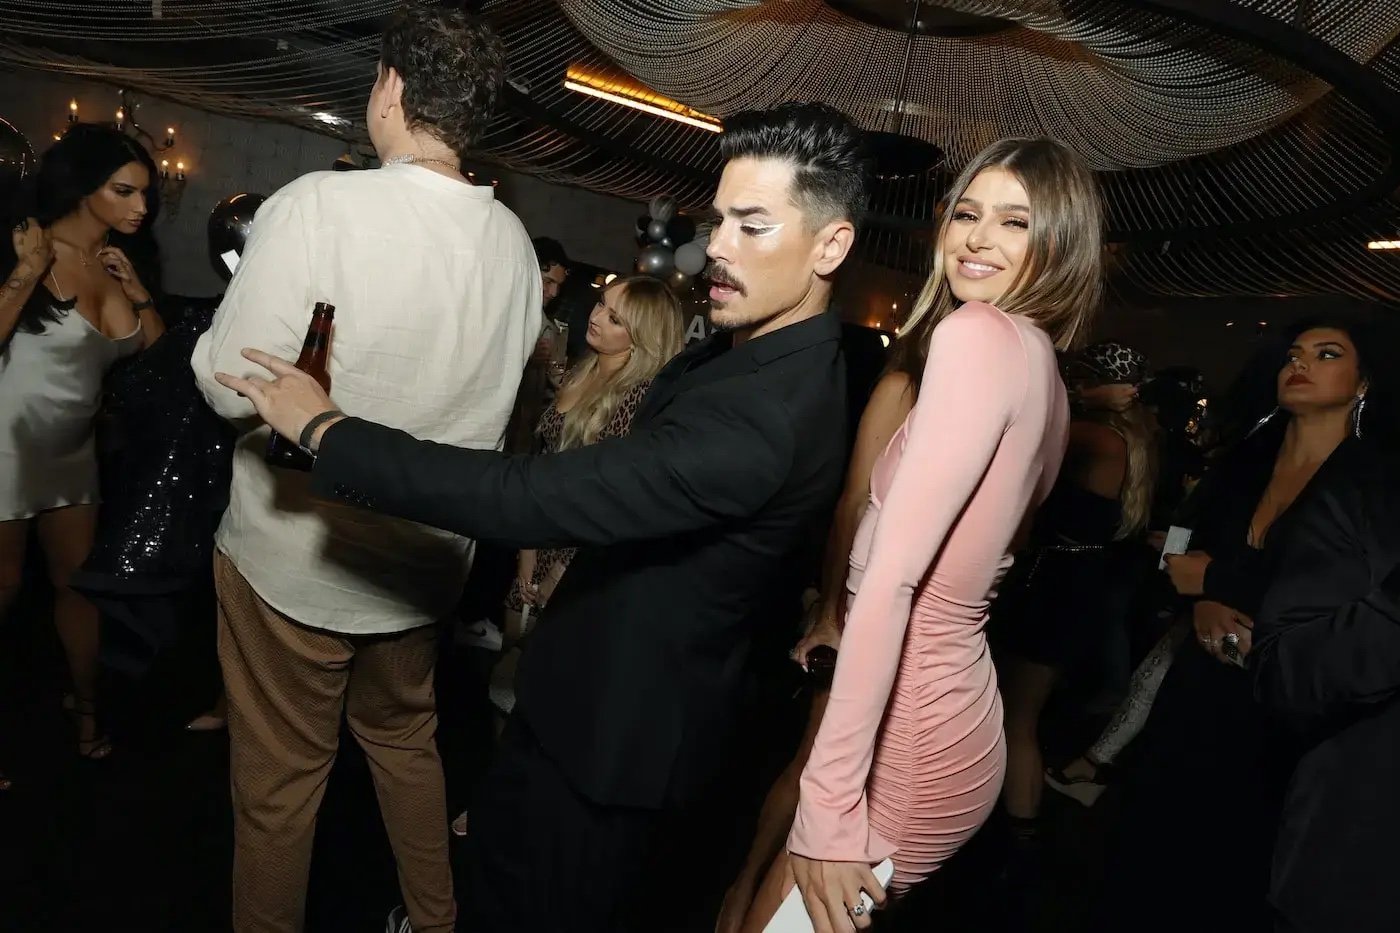 'Vanderpump Rules' cheaters Tom Sandoval and Raquel Levis dance together at an event.